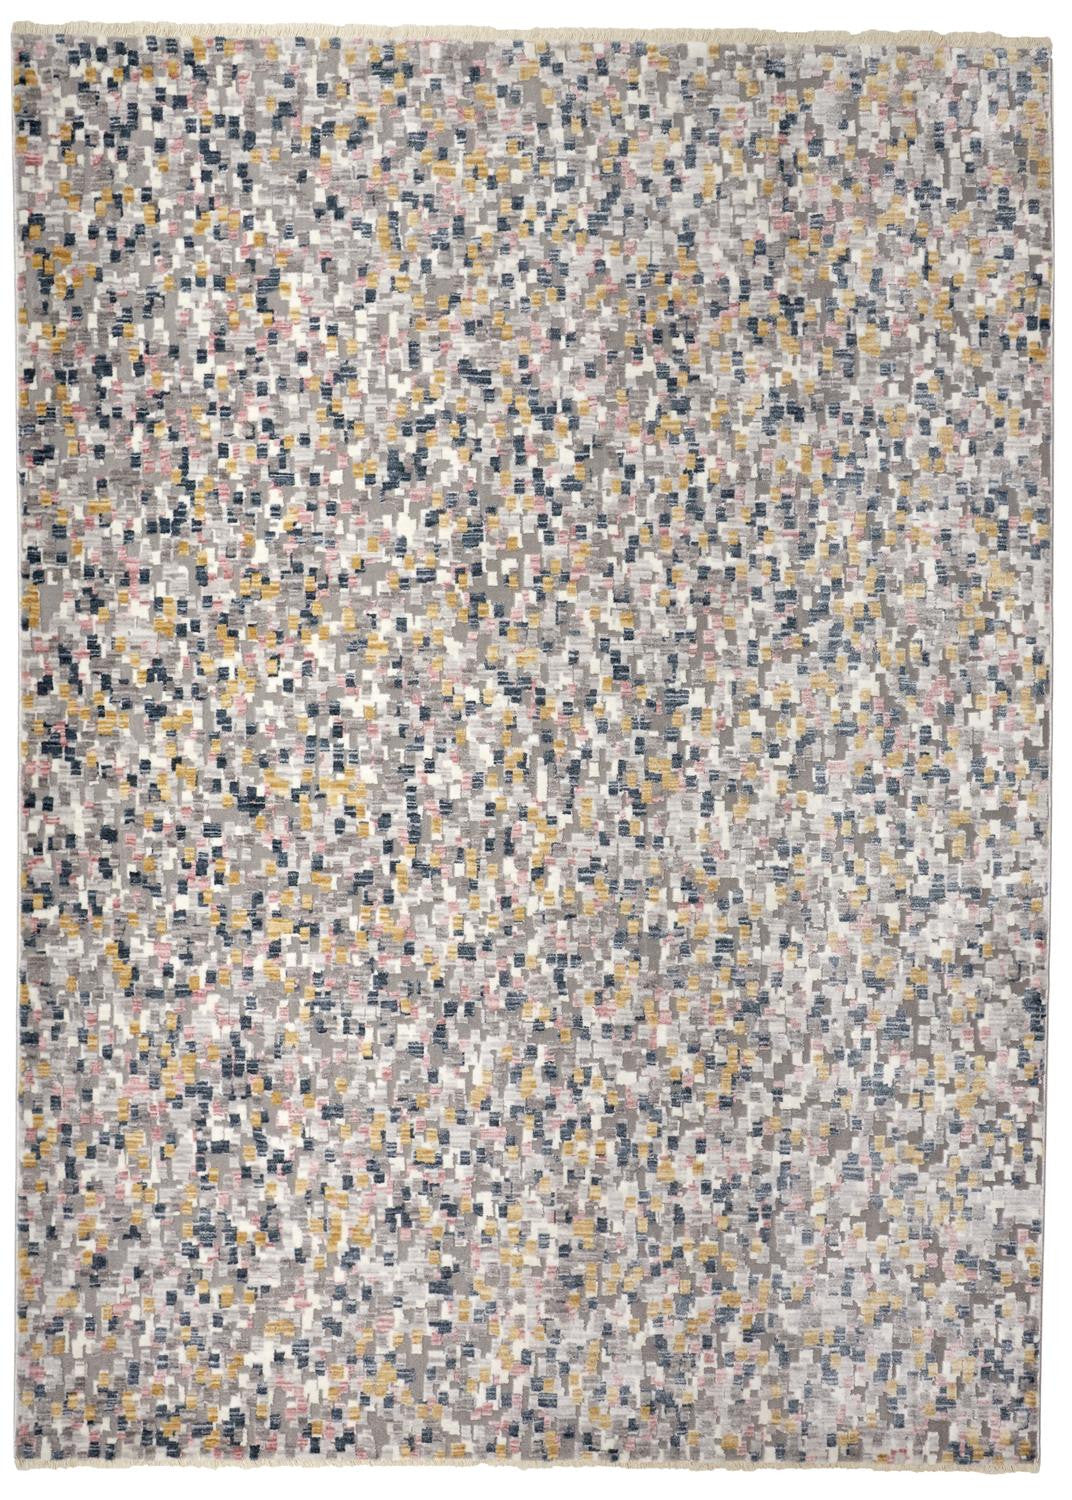 4' X 6' Taupe Tan And Orange Abstract Stain Resistant Area Rug